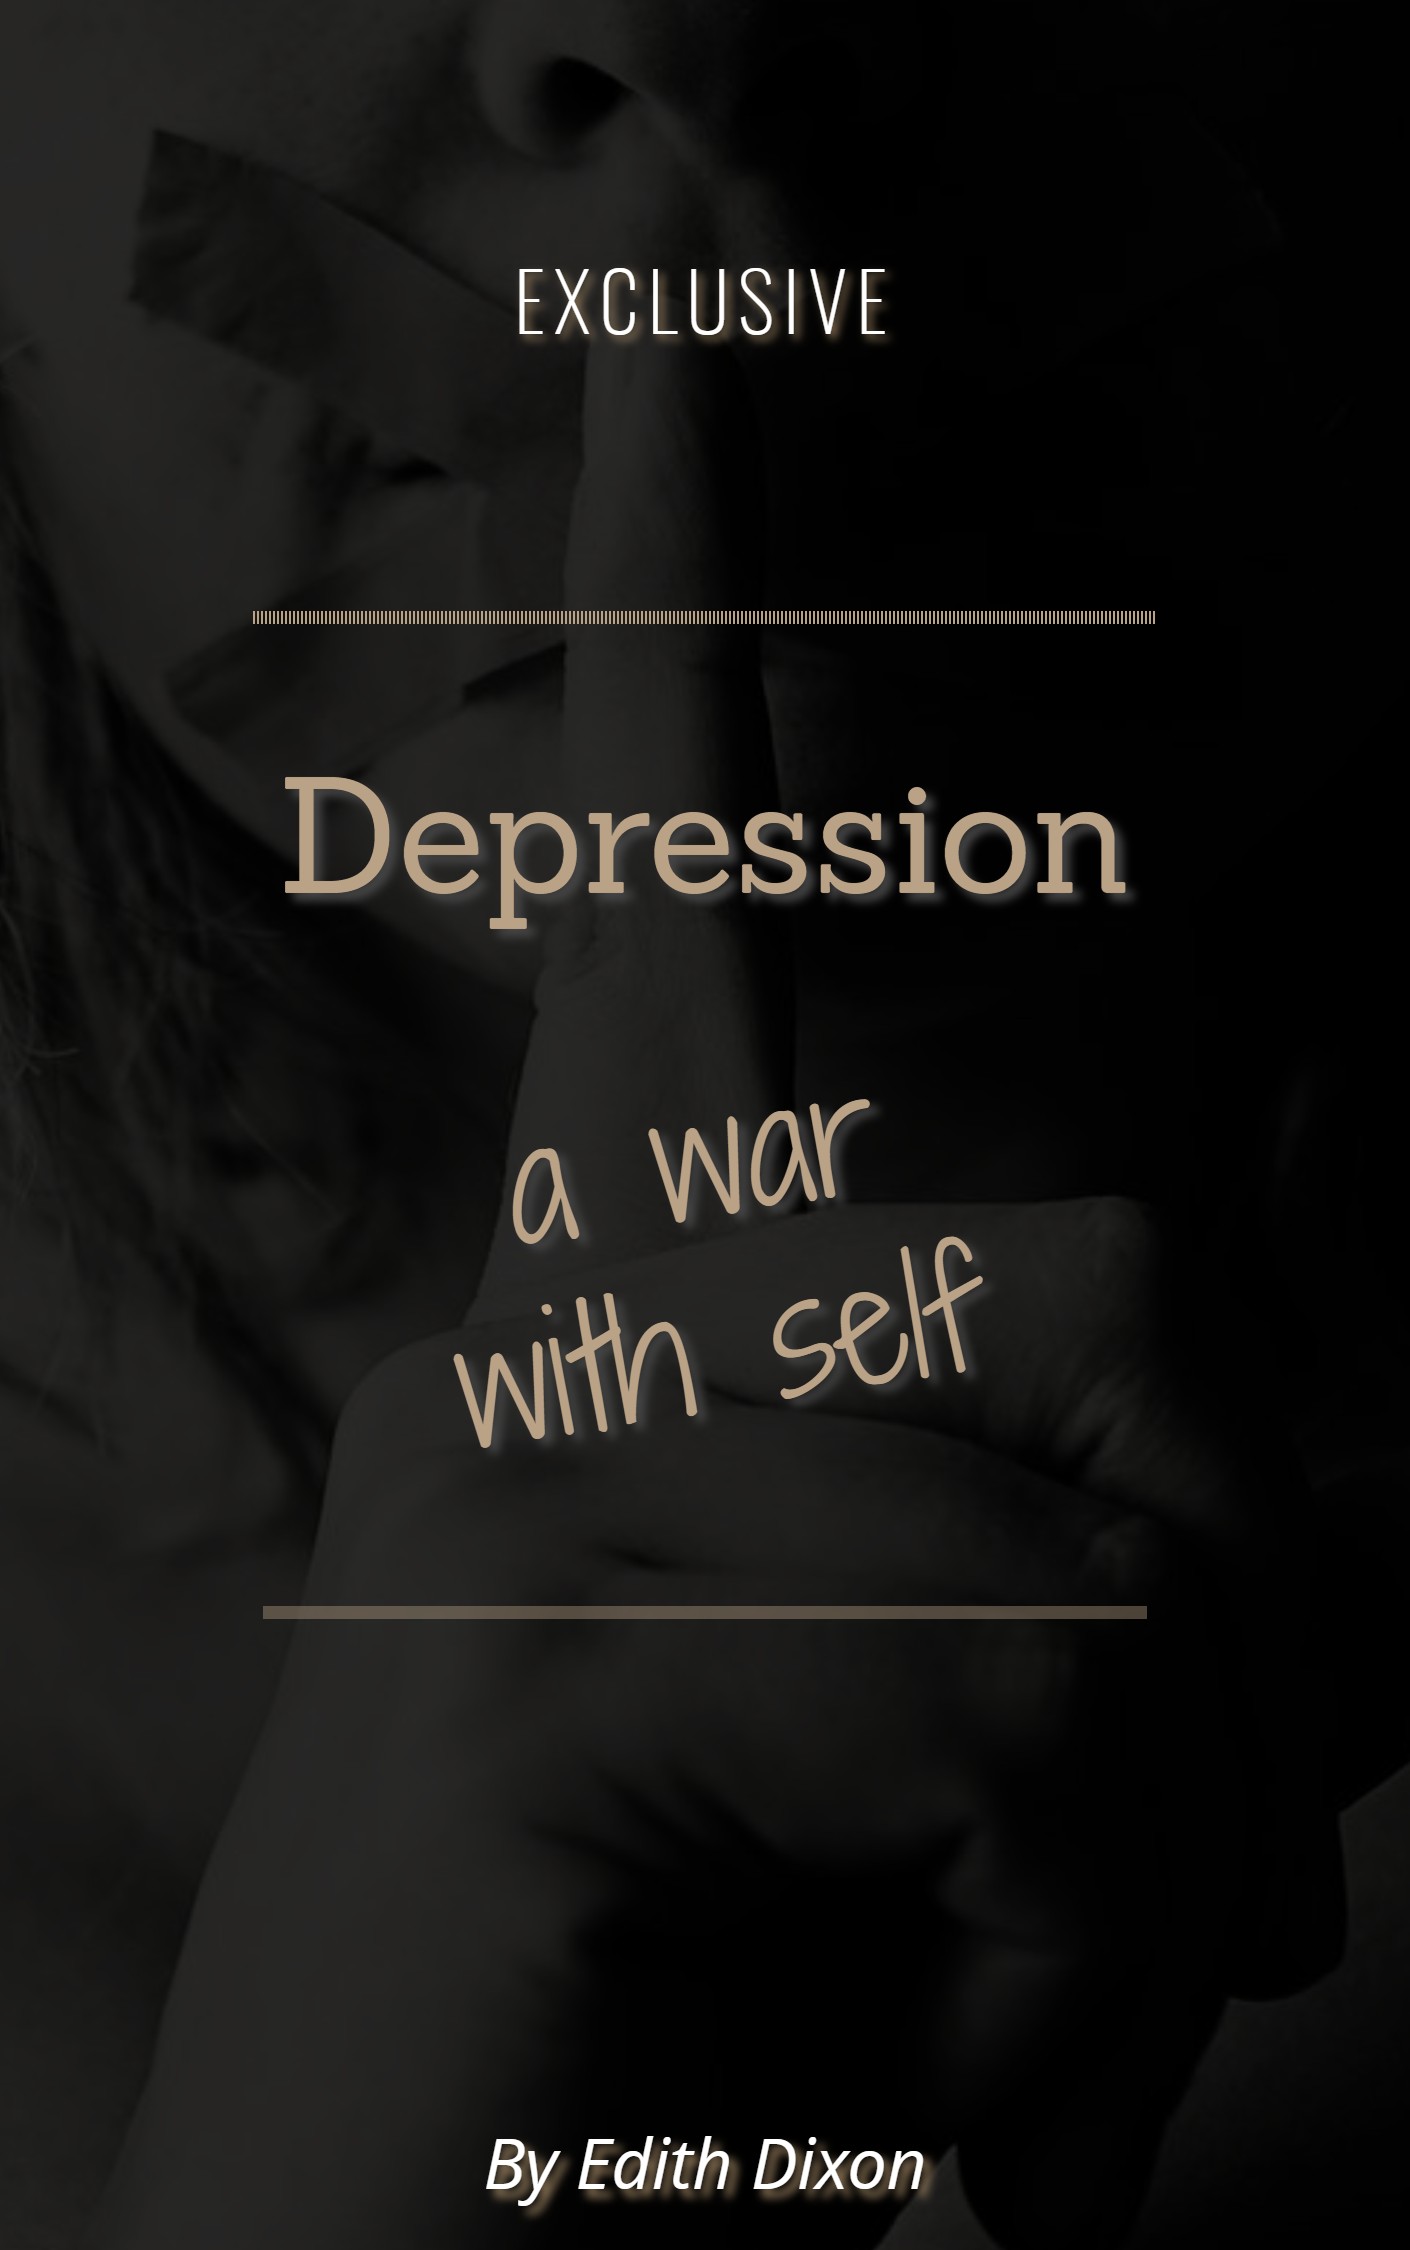 FREE: Depression, a war with self by Edith Dixon